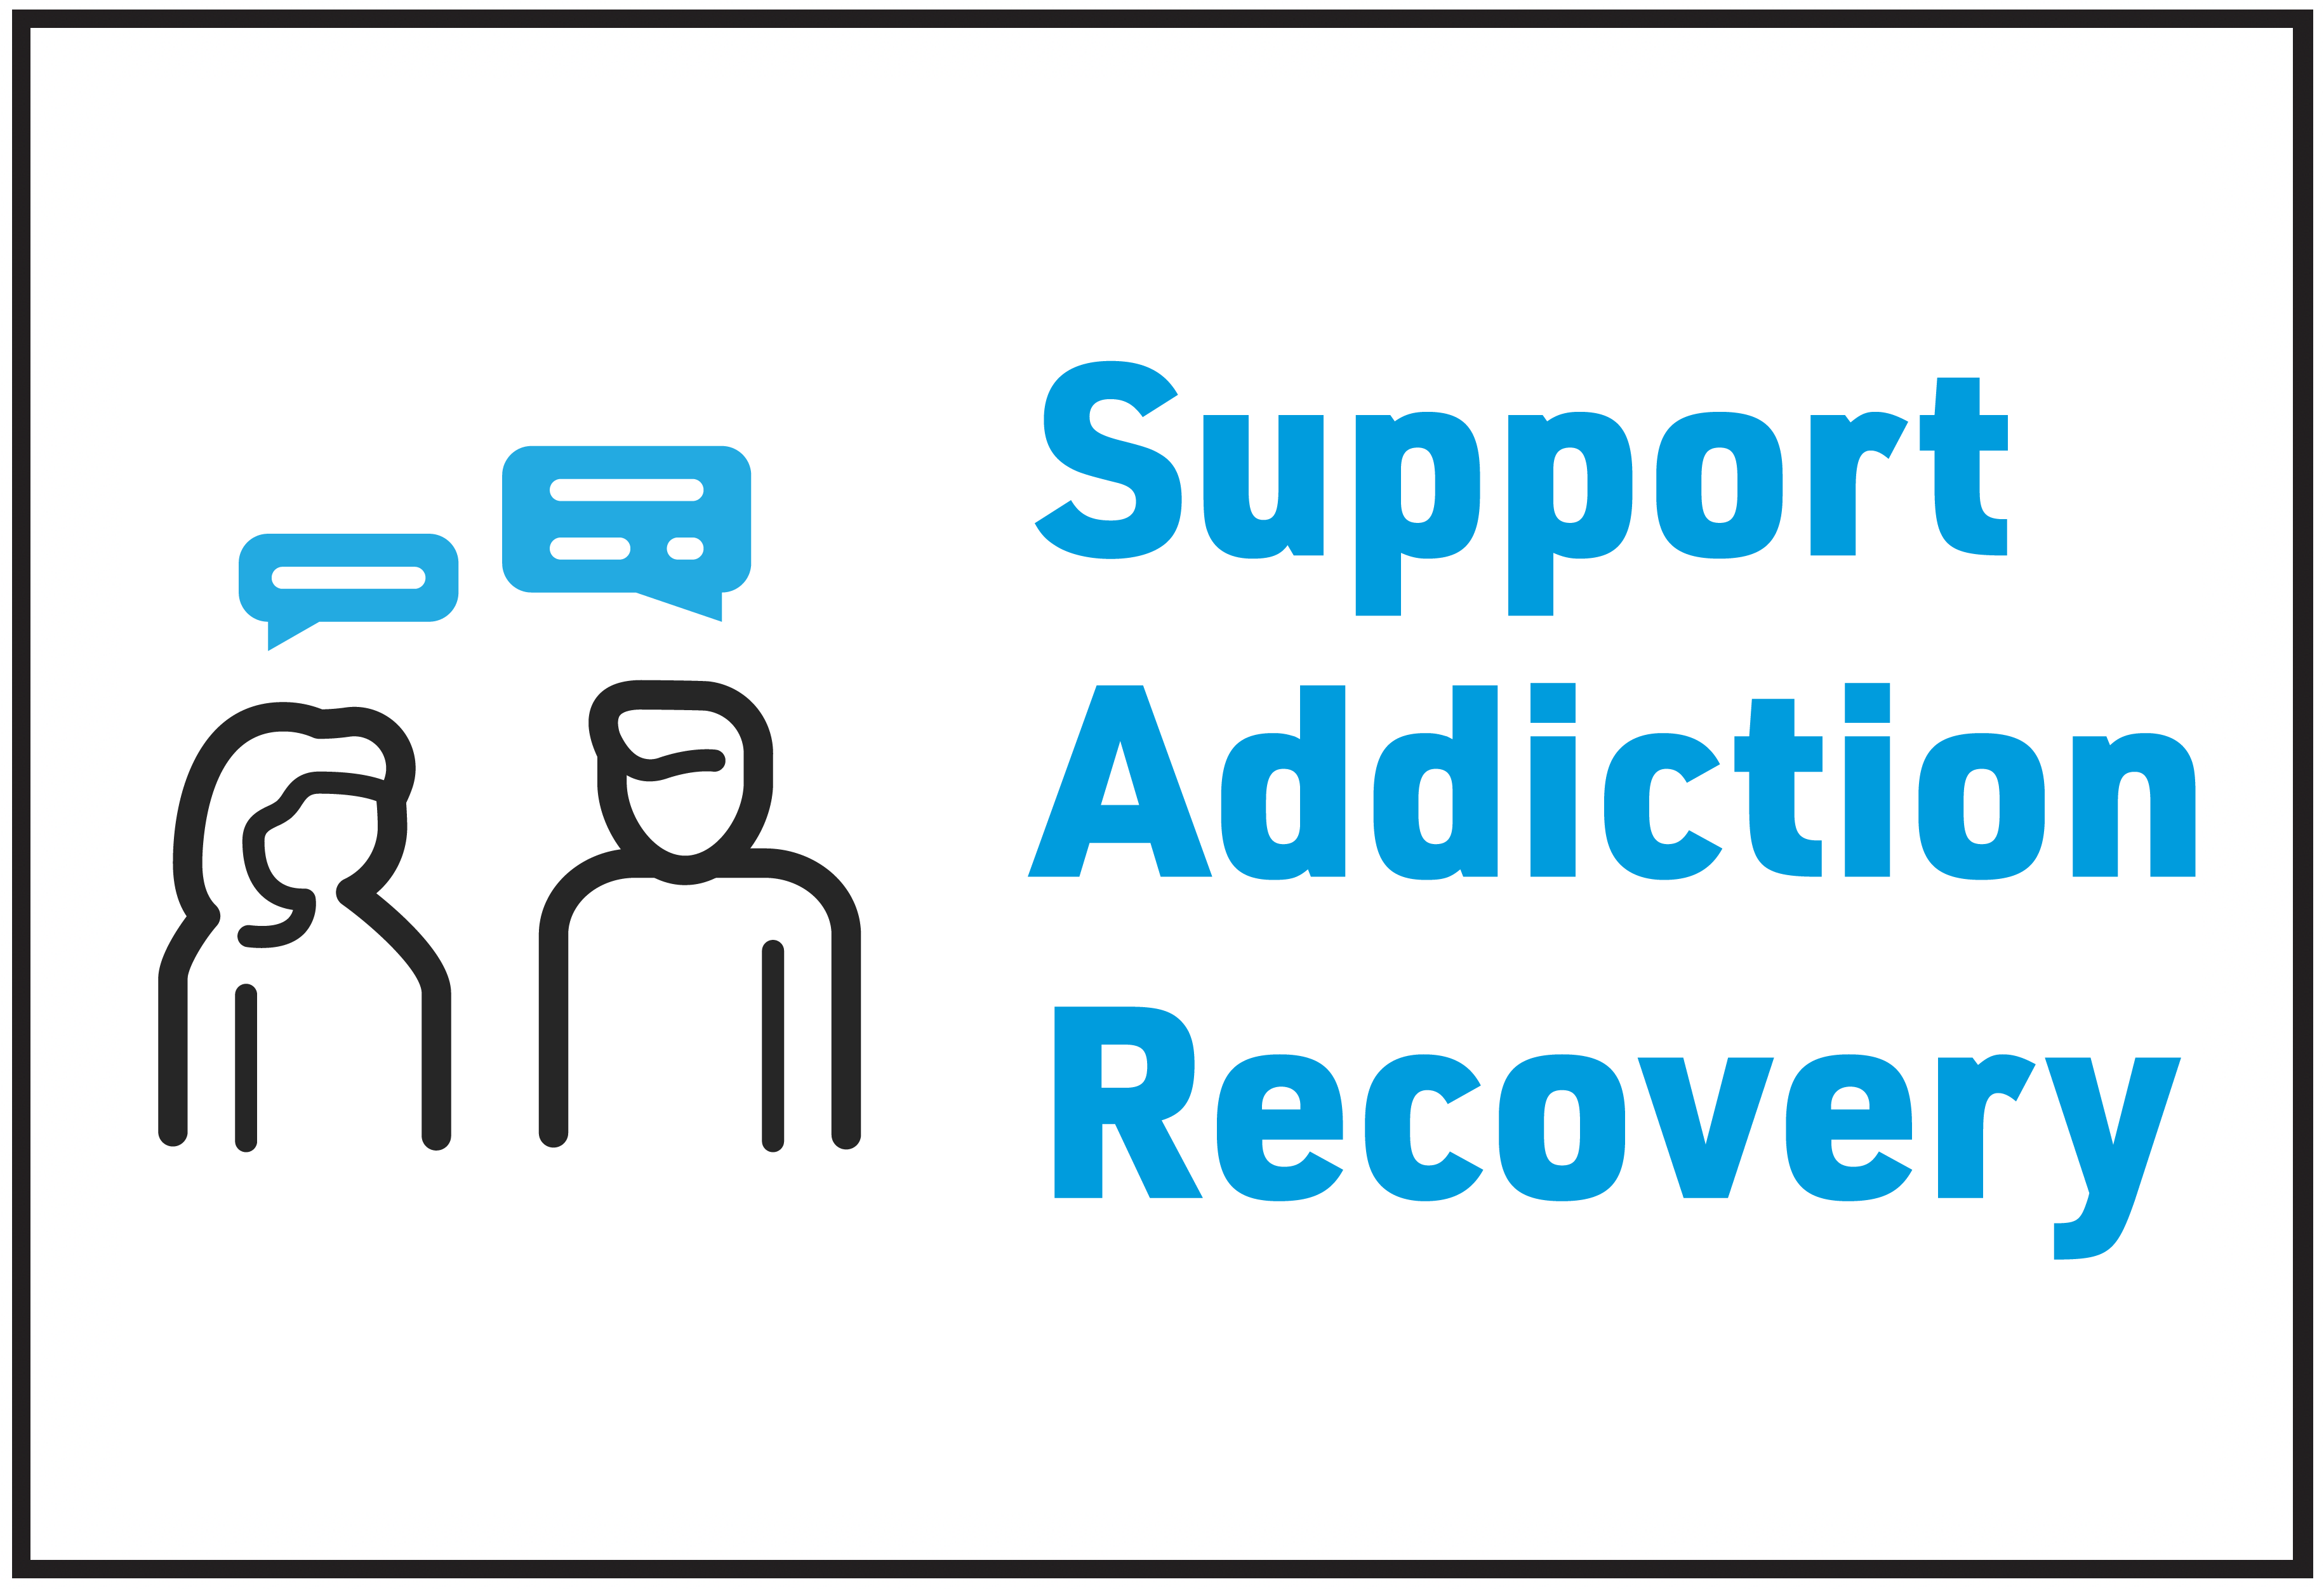 Support Addiction Recovery external site logo